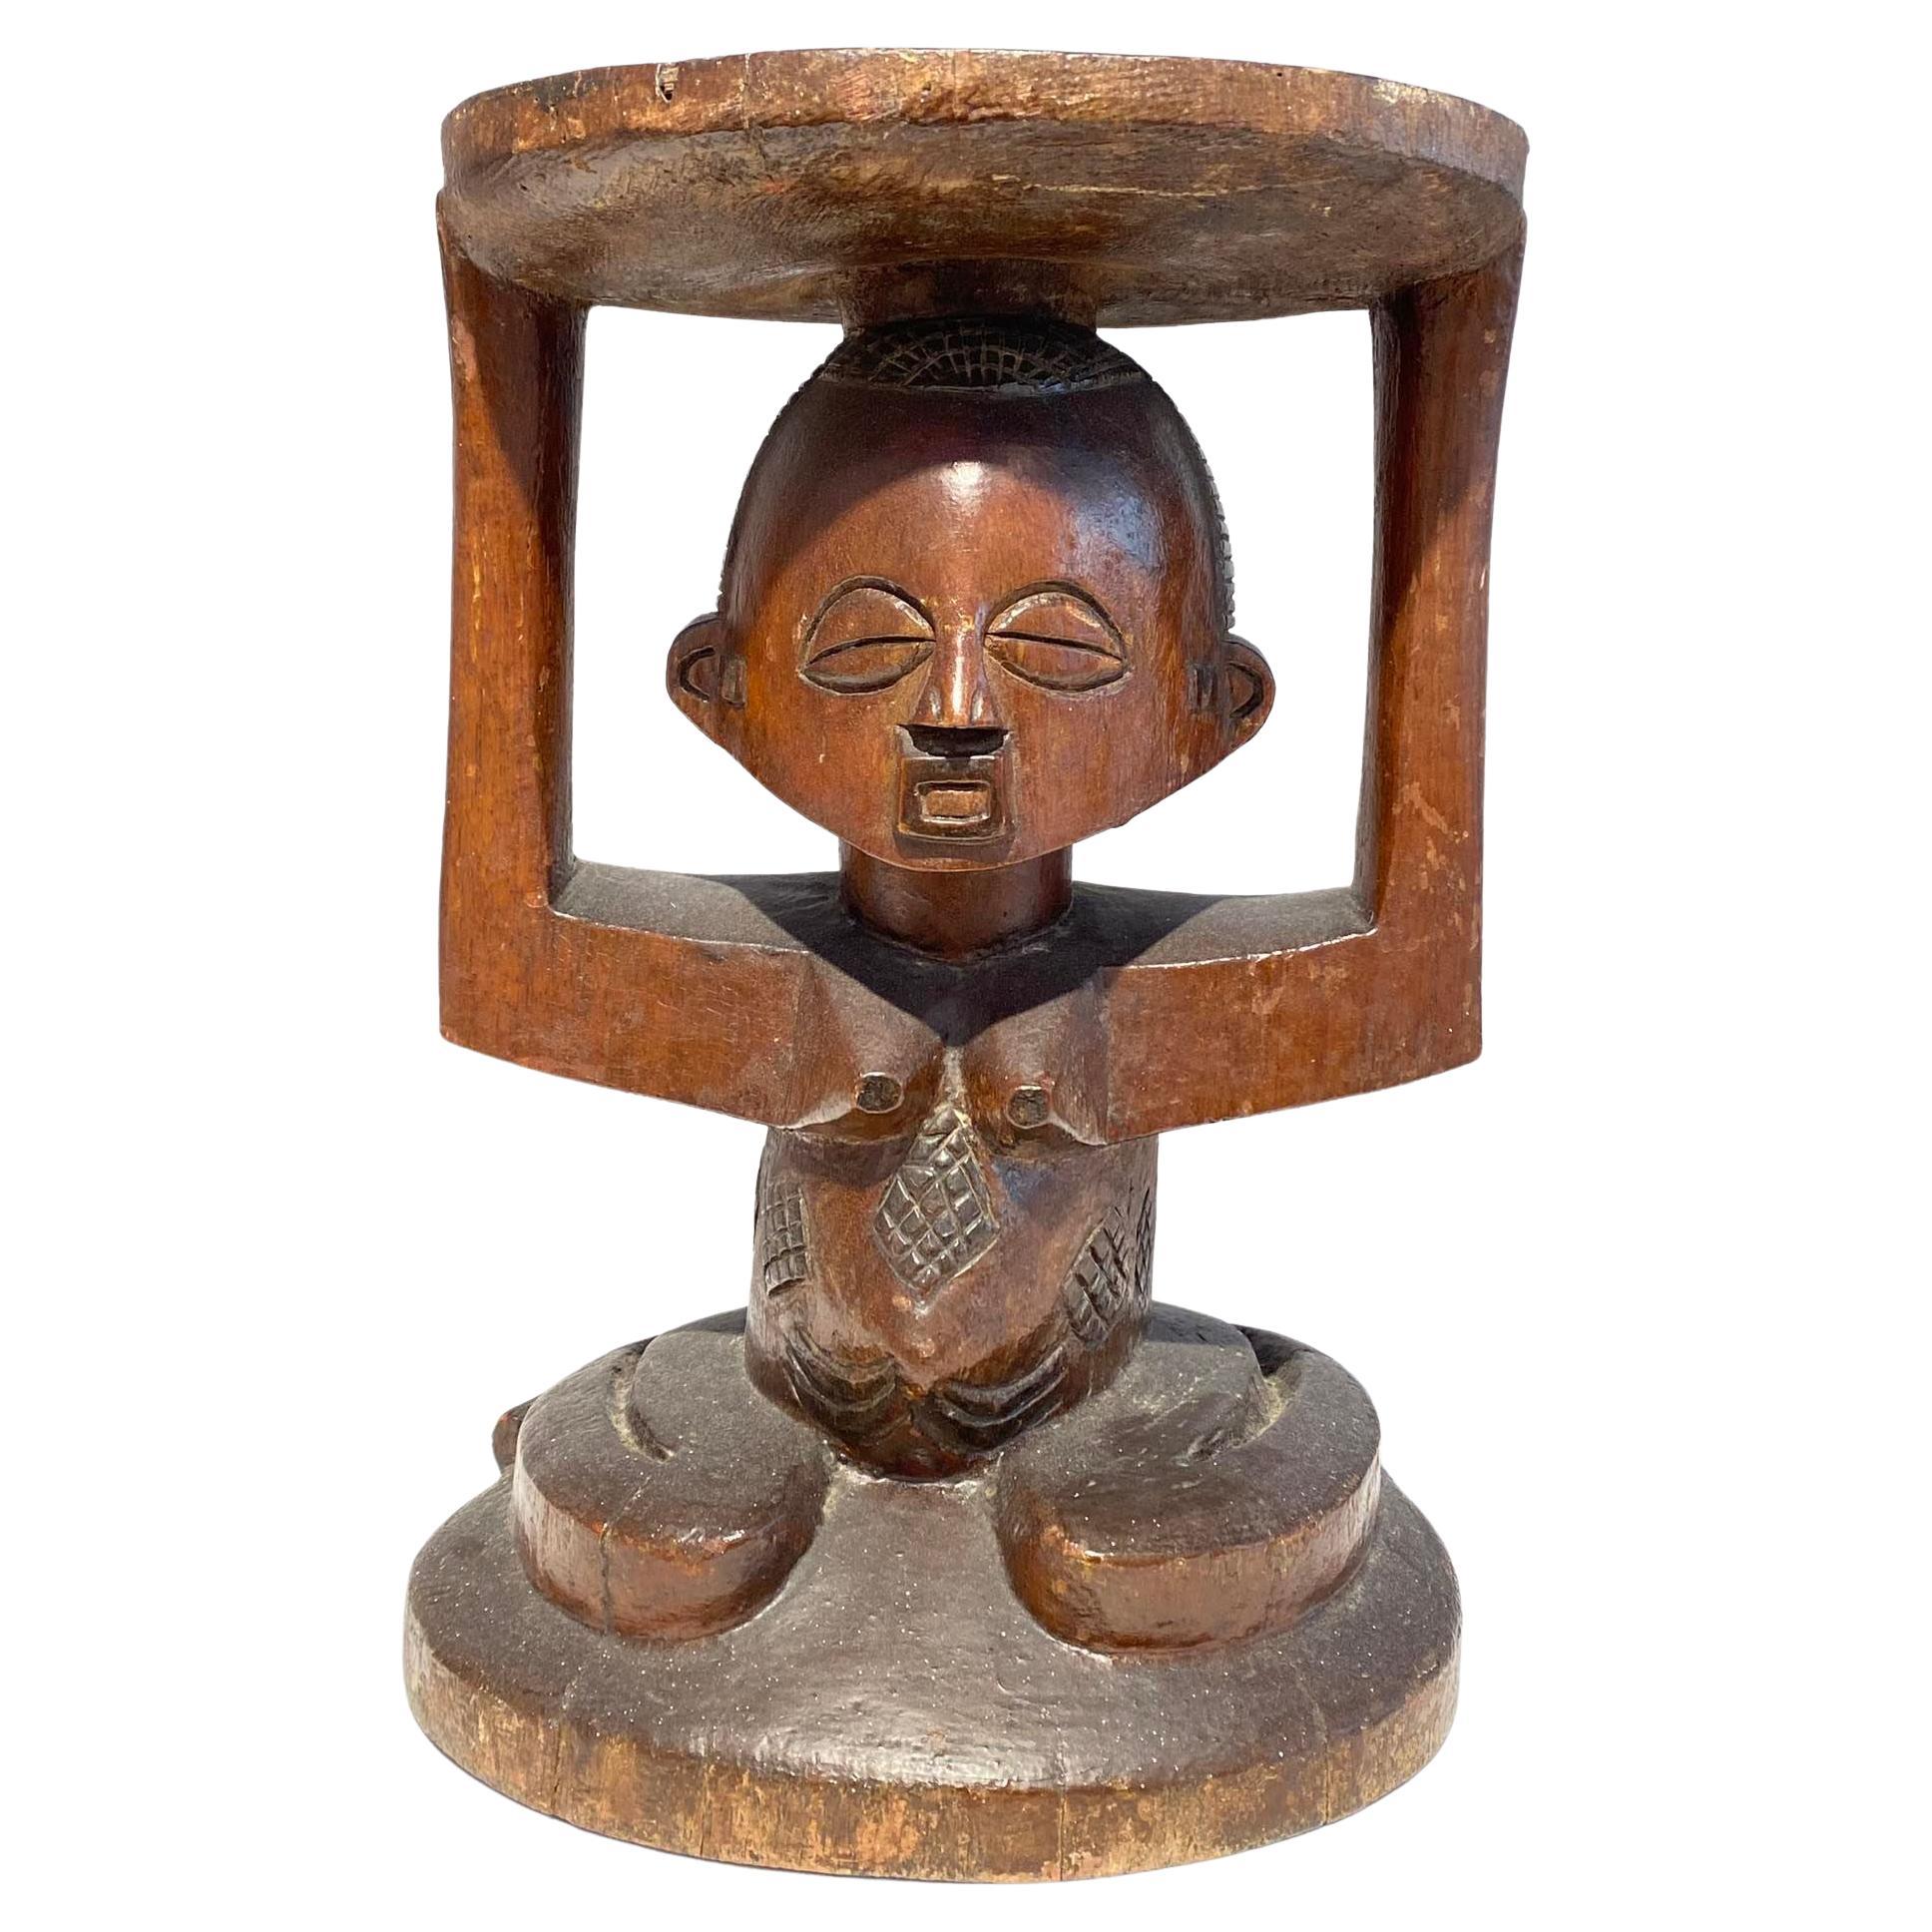 Luba Royal antique caryatid enthronement emblem early 20th DR Congo Africa